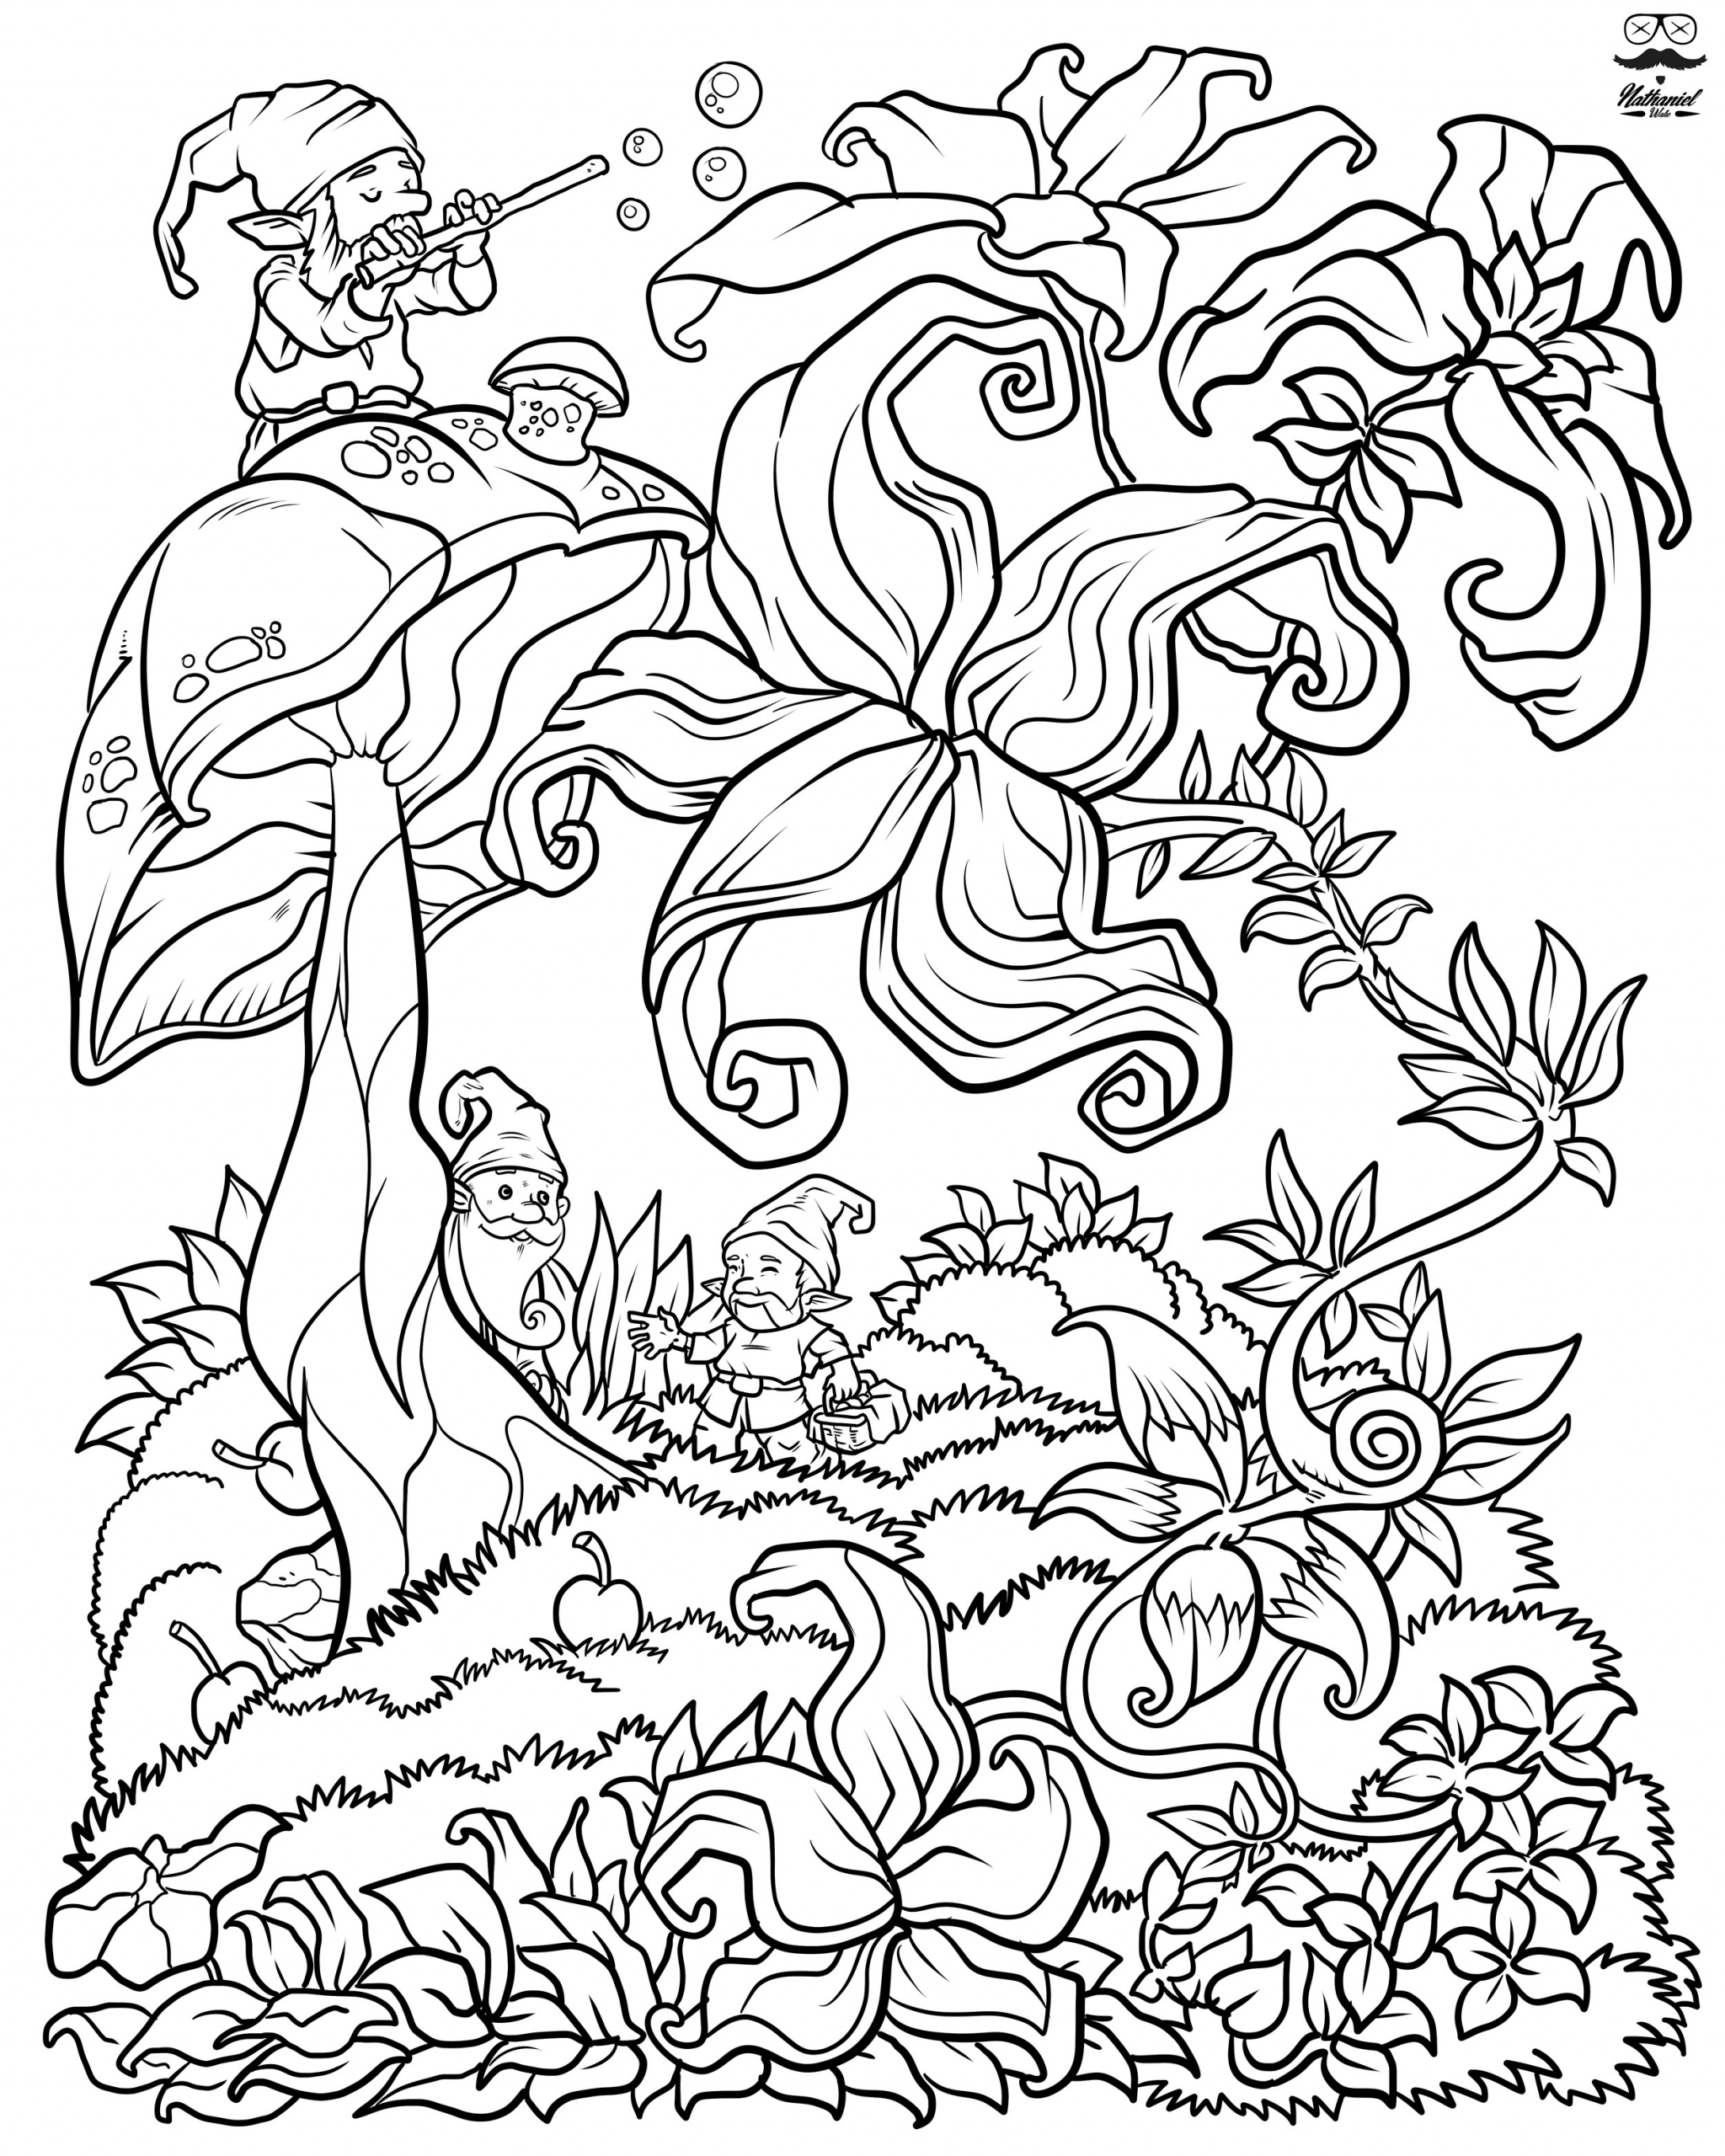 Coloring For Adults Book
 Floral Fantasy Digital Version Adult Coloring Book